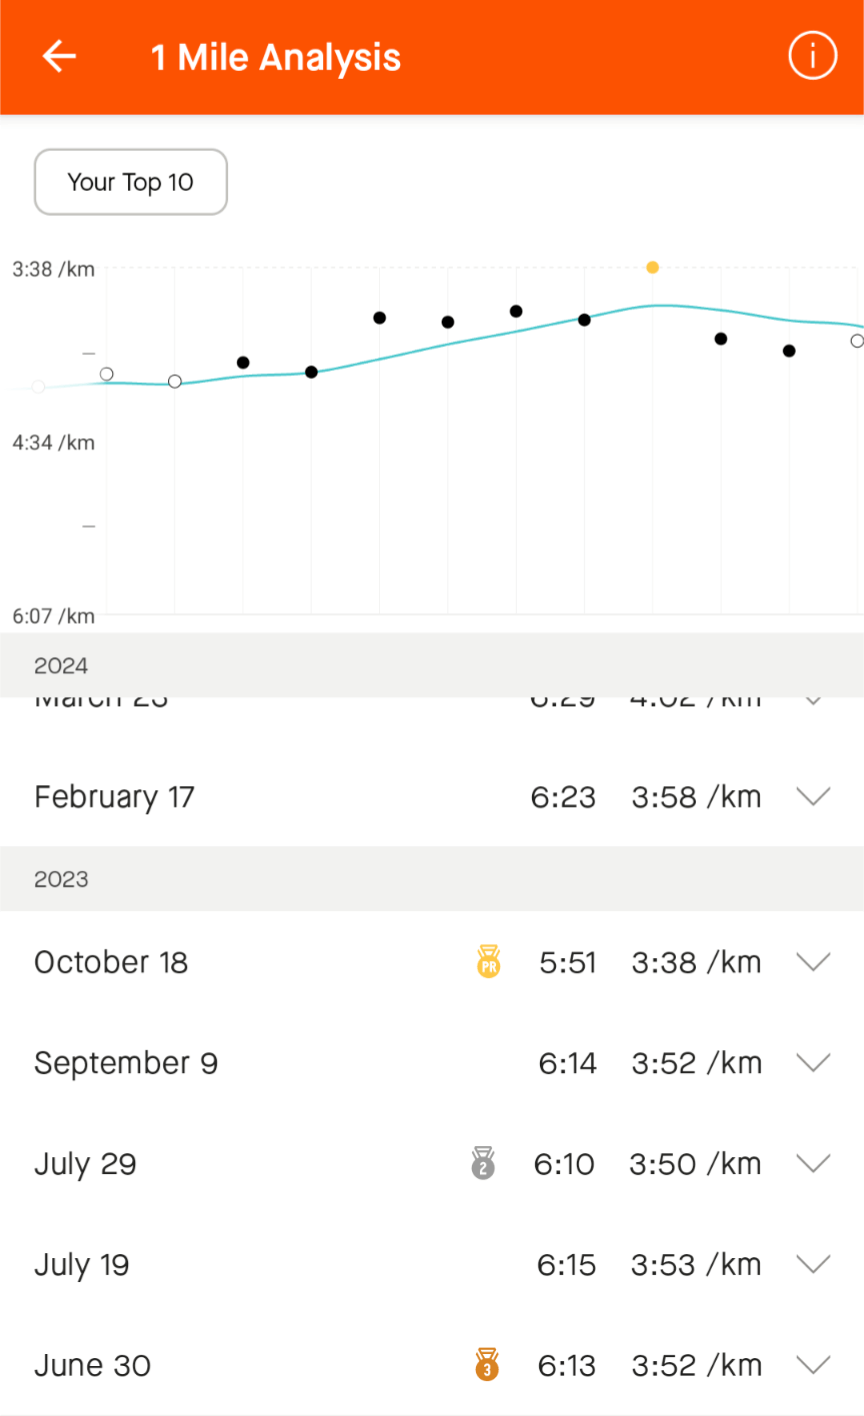 Strava 1 mile analysis mobile view, showing my best efforts over 2023-2024